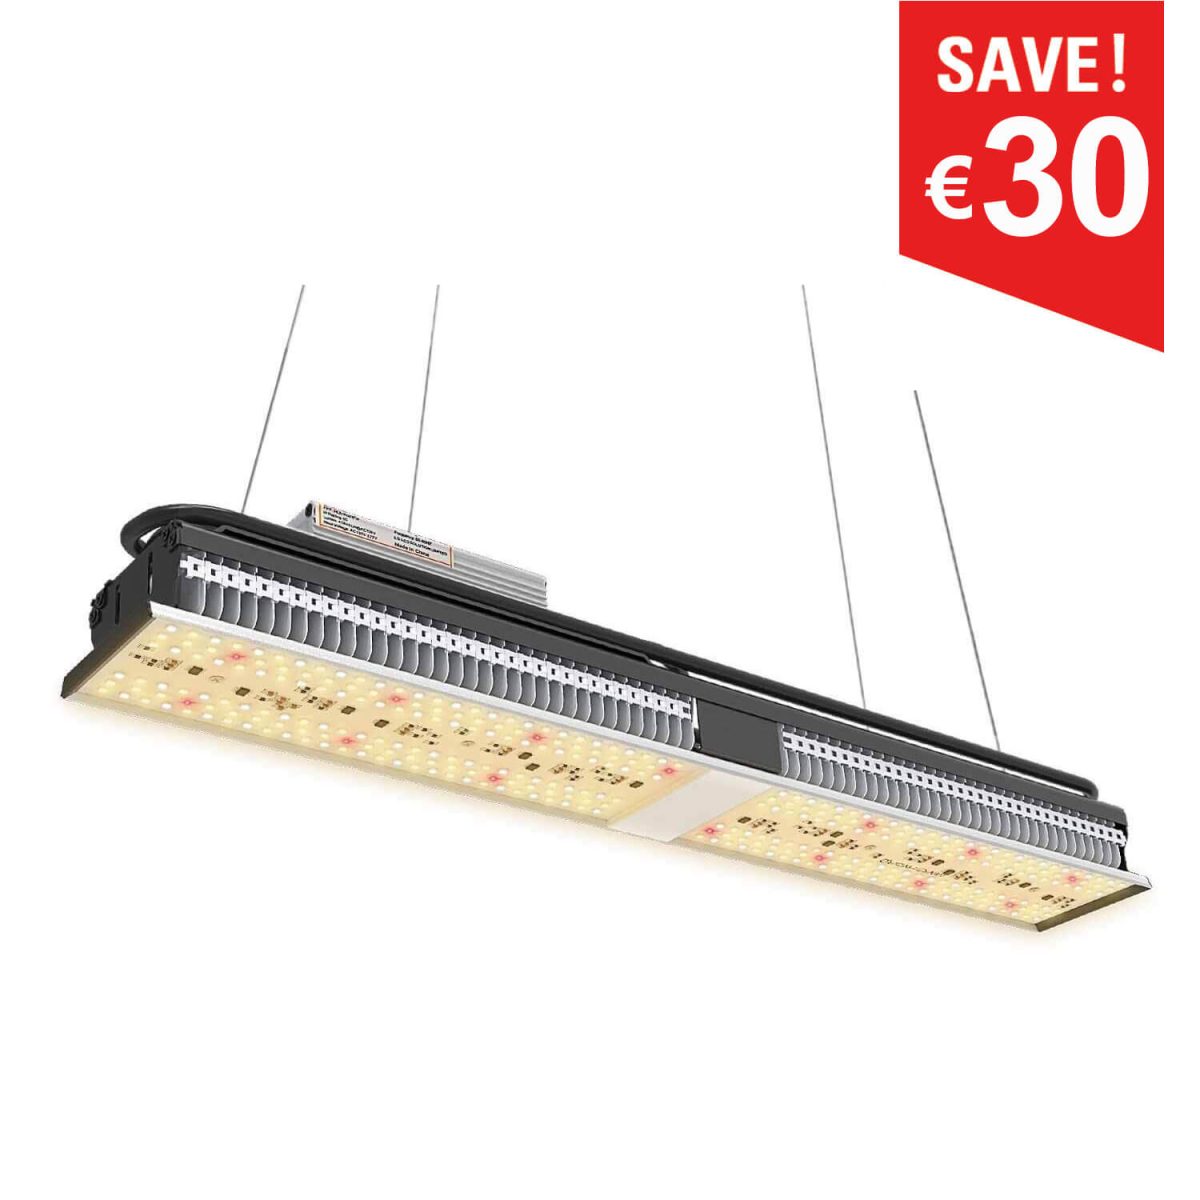 Mars Hydro SP150 LED with 30euro discount